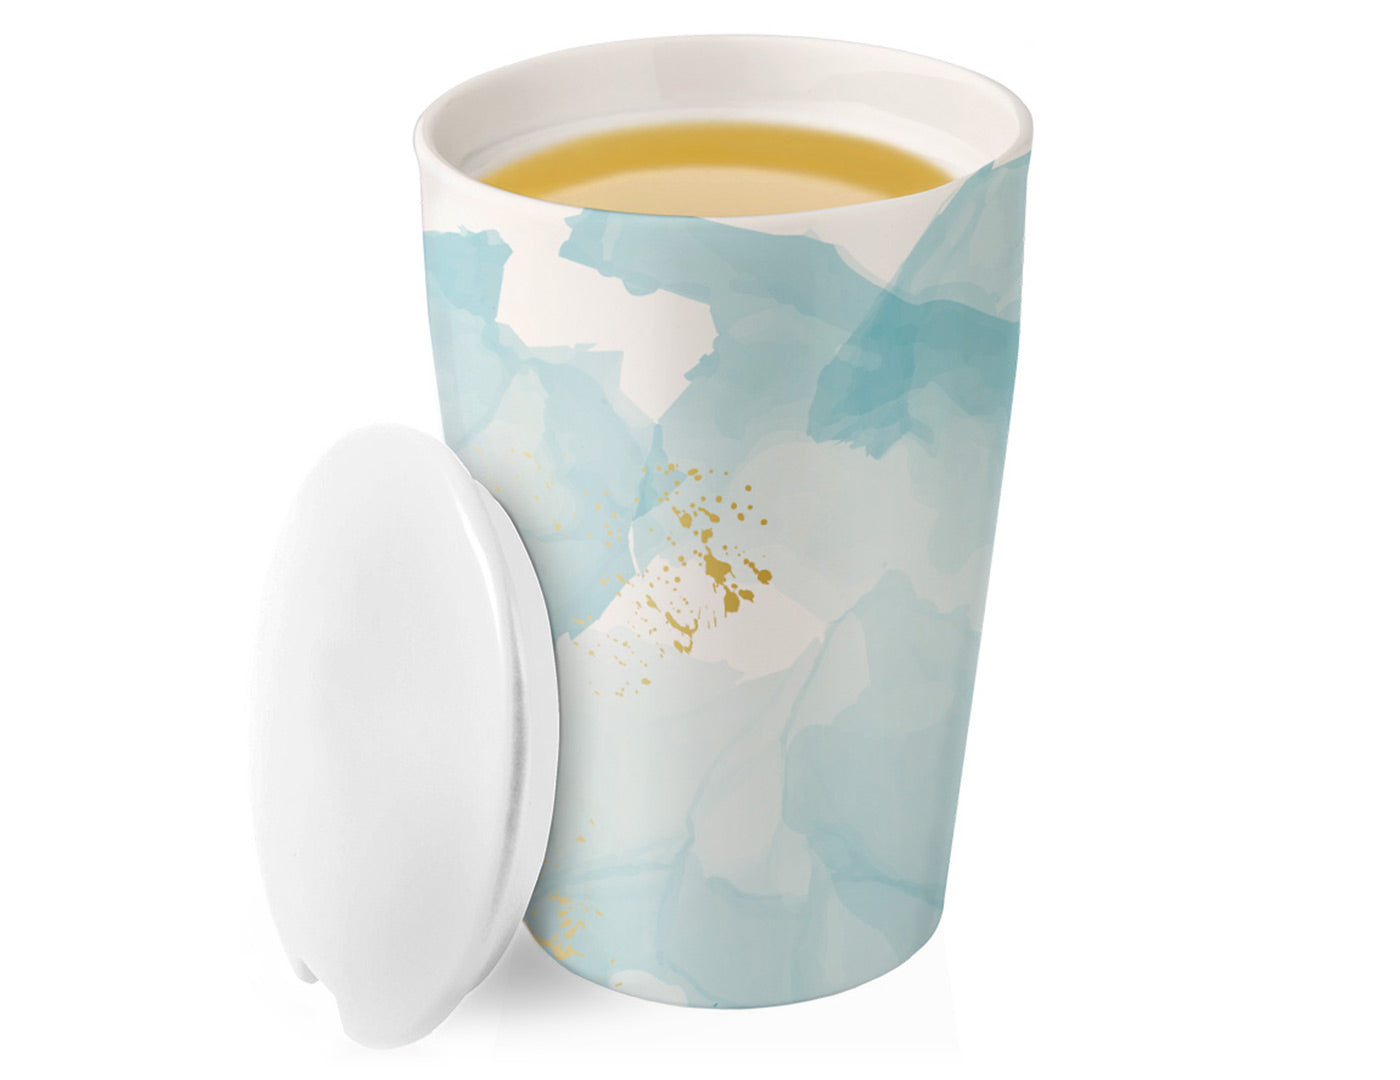 Wellbeing KATI® Steeping Cup with lid off and steeped tea inside cup